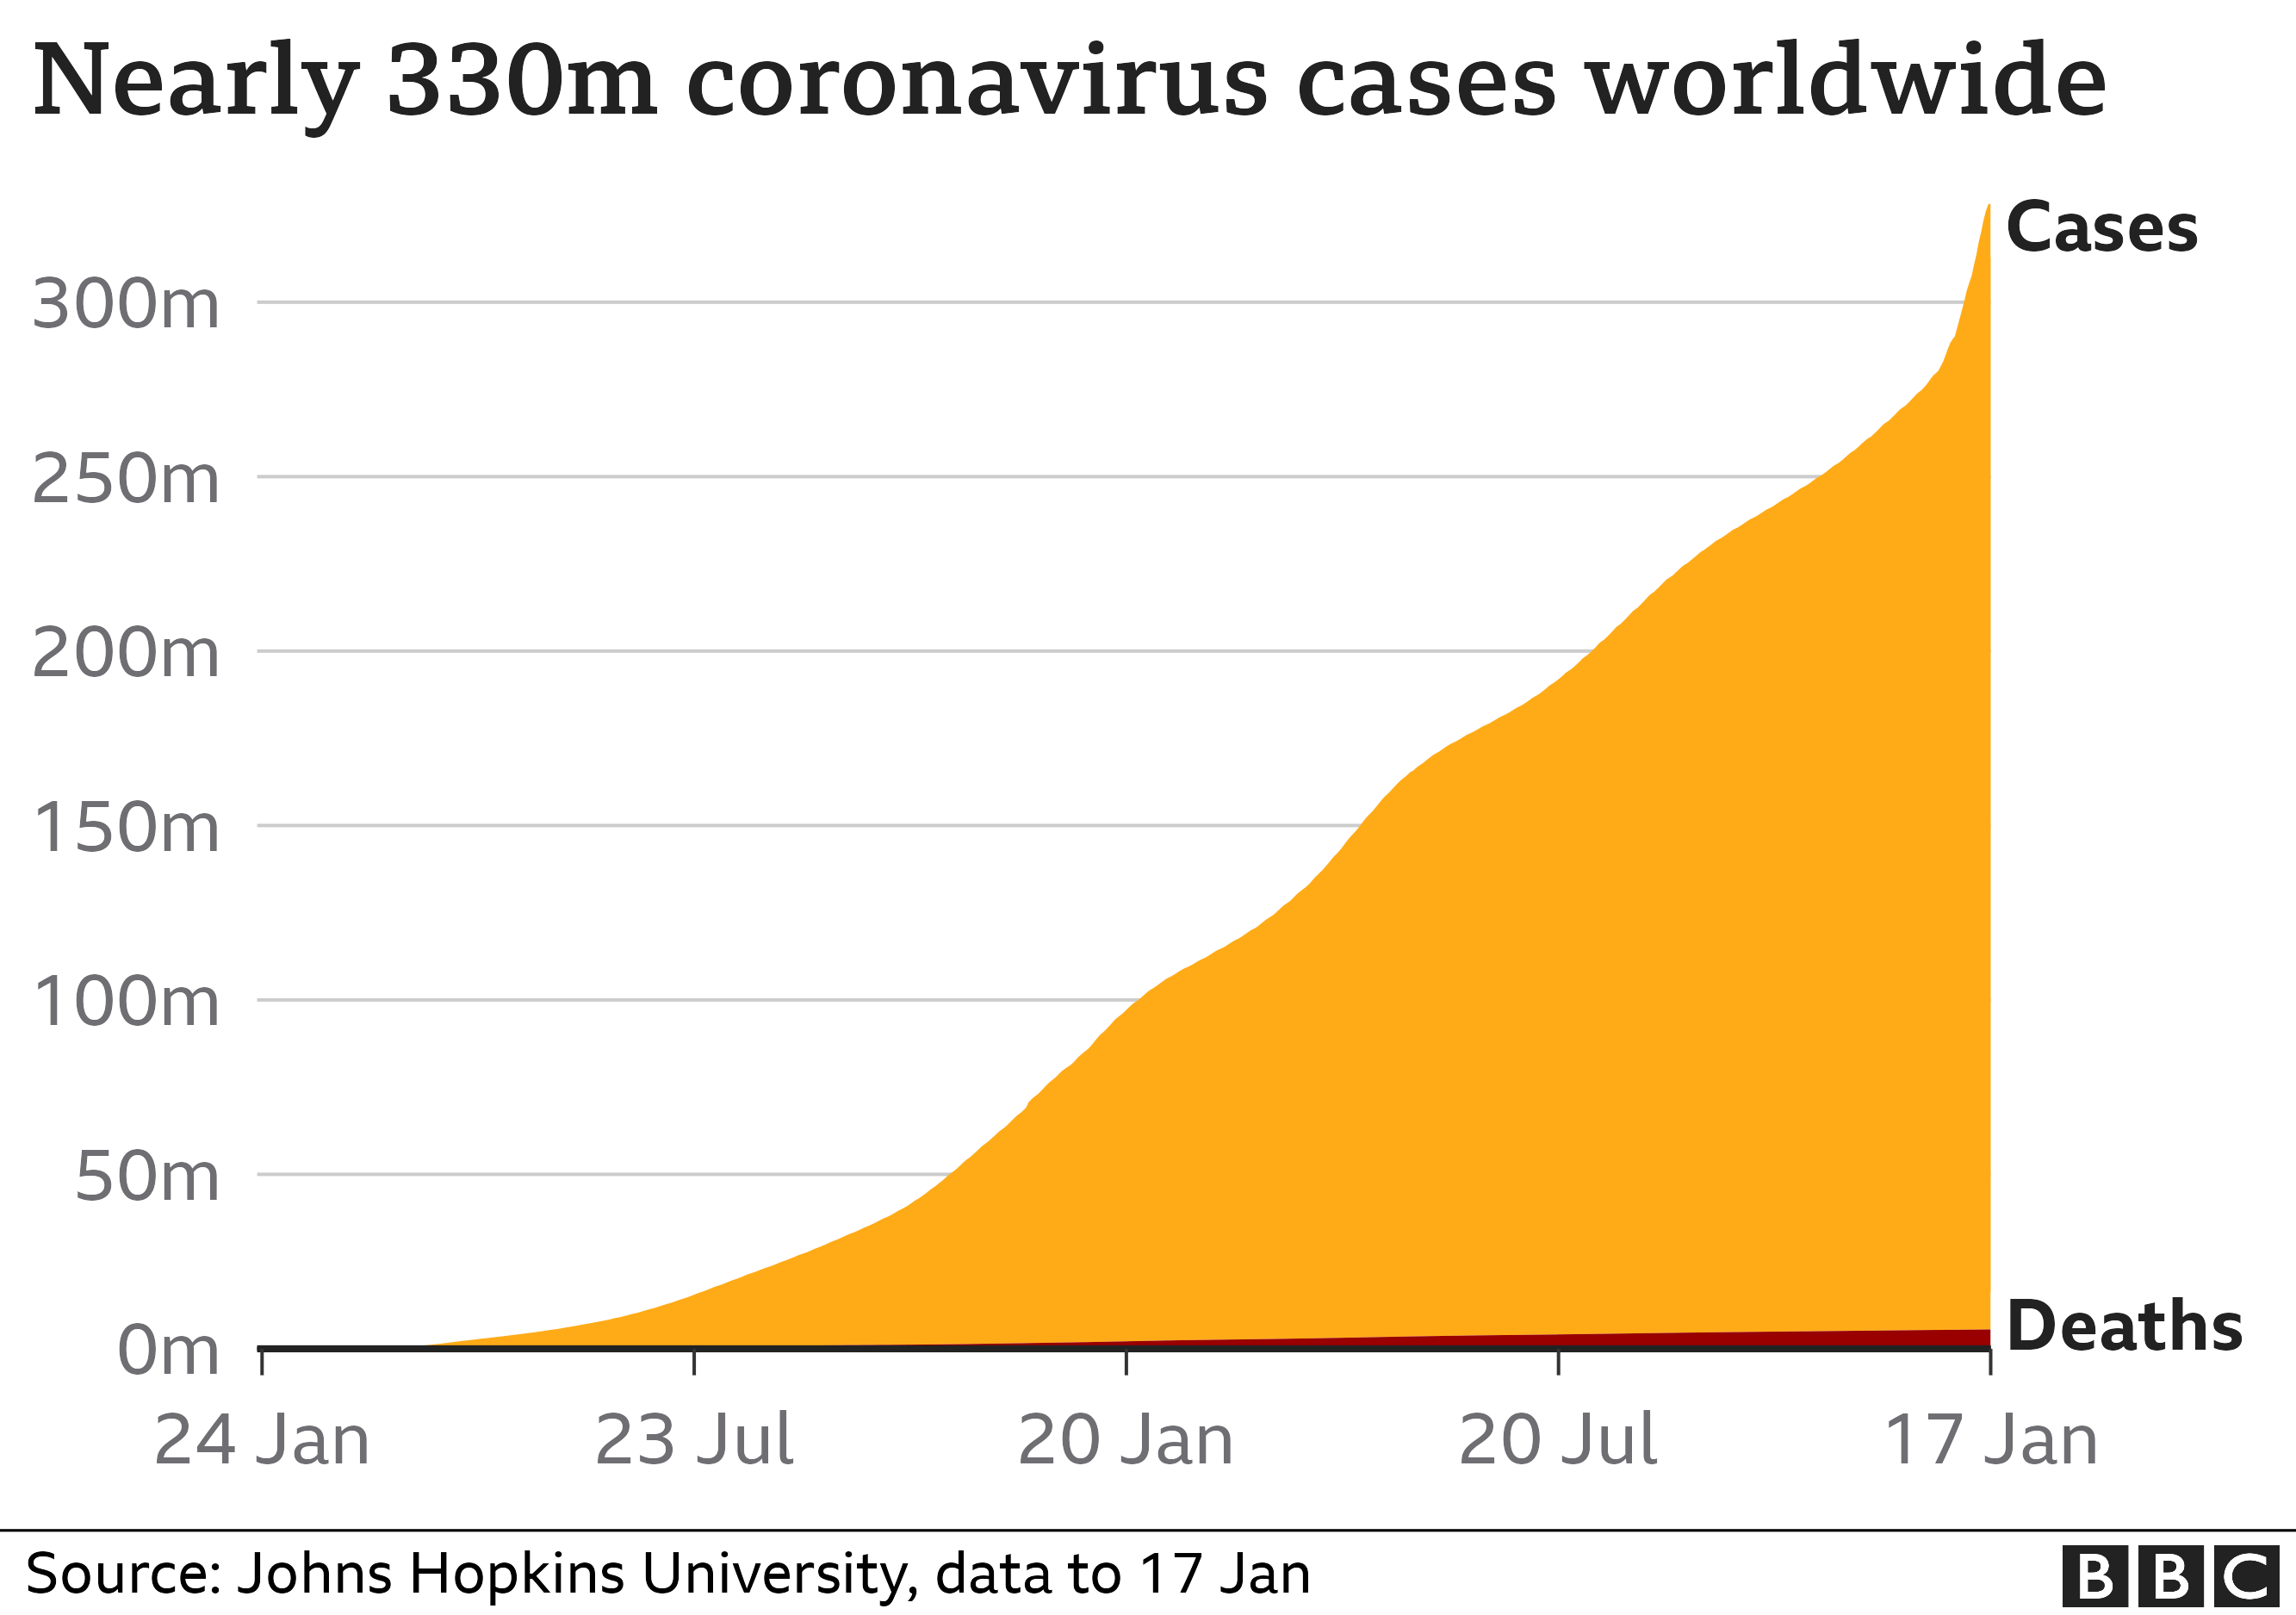 Chart showing there have been more than 330 million coronavirus cases reported worldwide